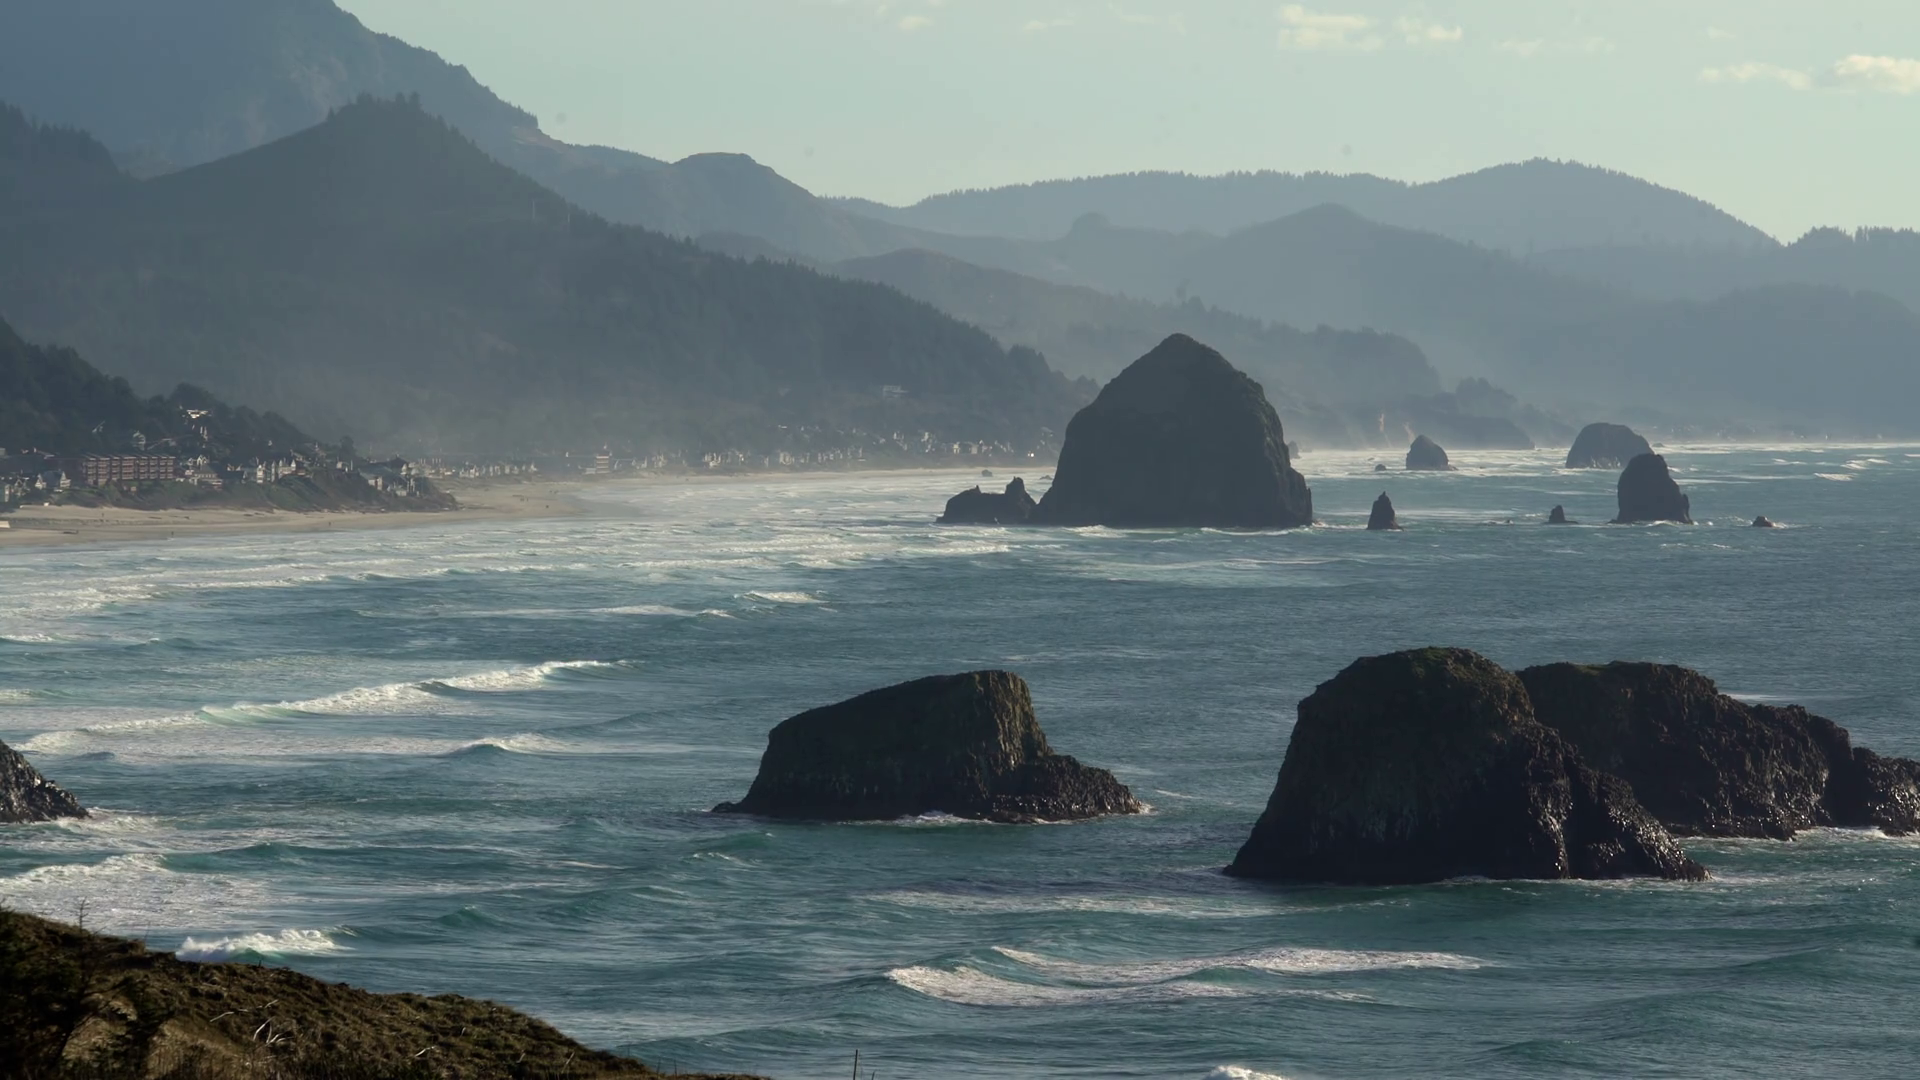 Haystack Rock and Pacific Coastline. Though a calm, sunny winter day ...